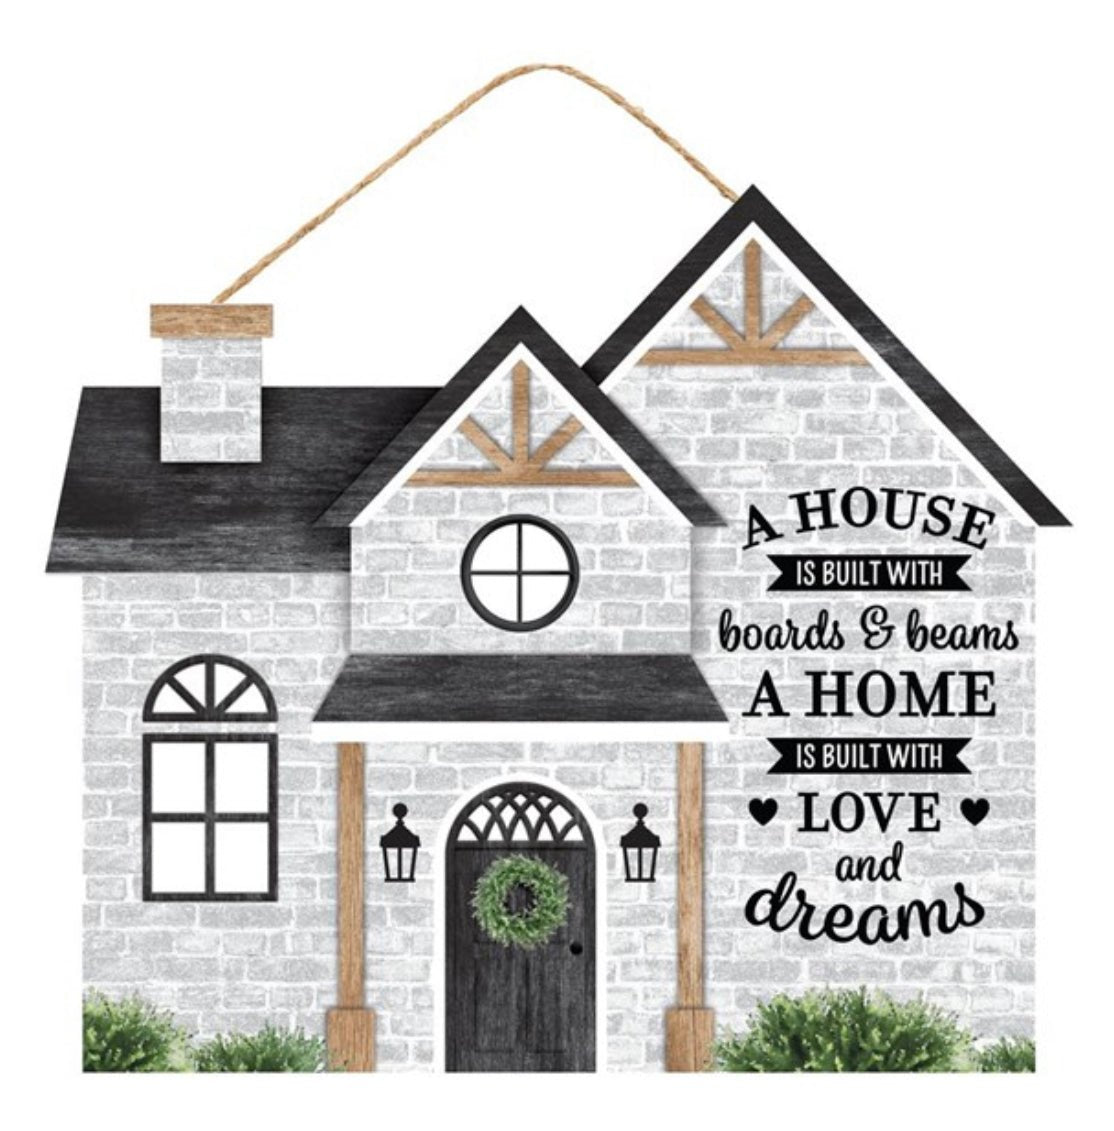 Love dreams home house sign - Greenery Market signs for wreaths